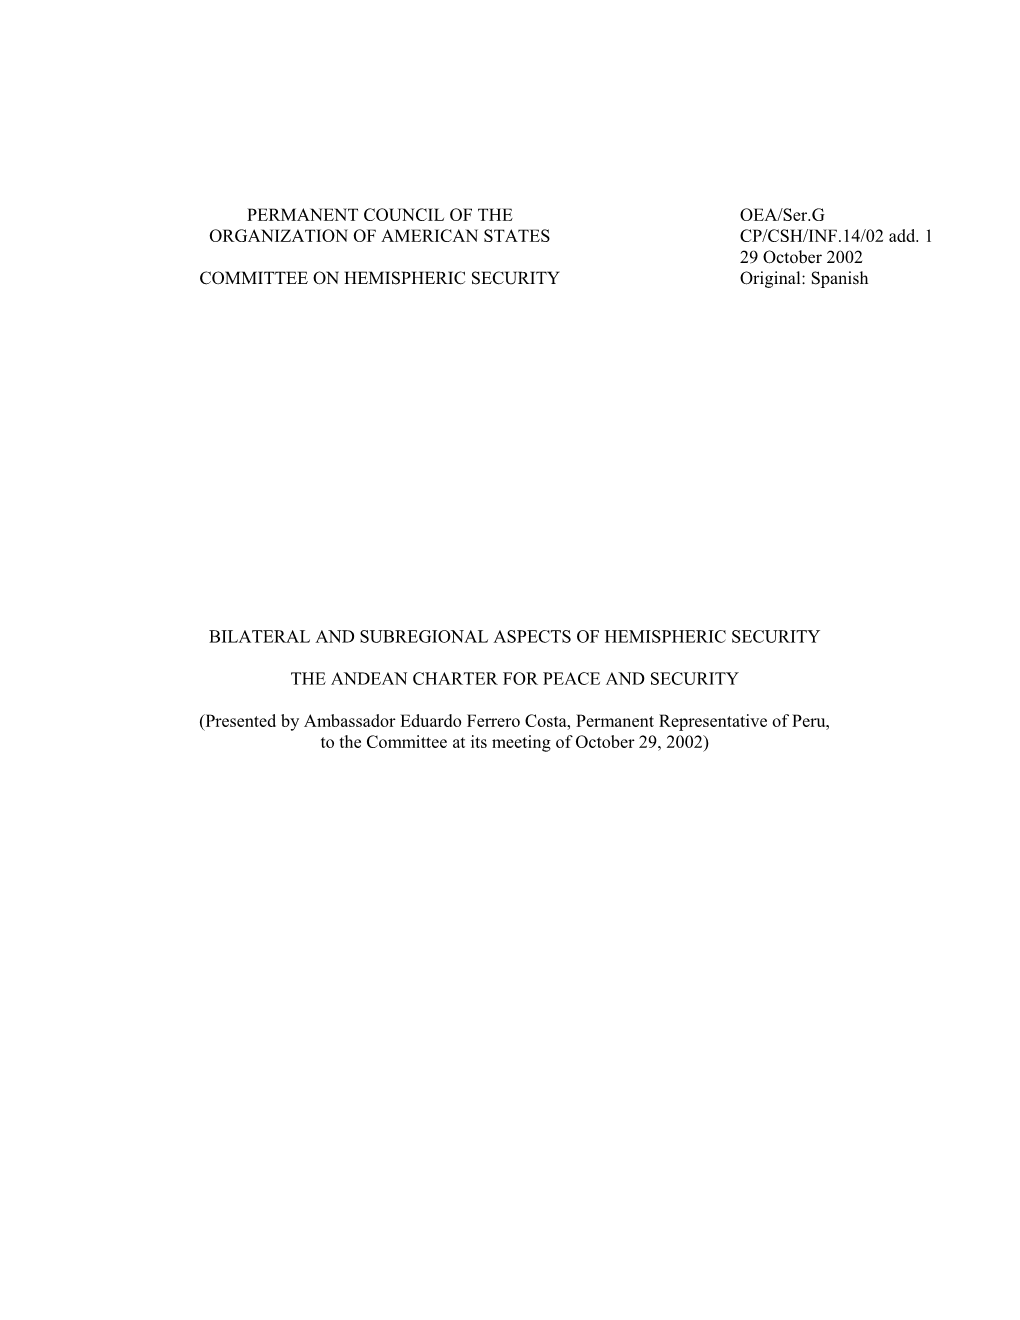 List of Oas Studies and Reports Related to Hemispheric on Security